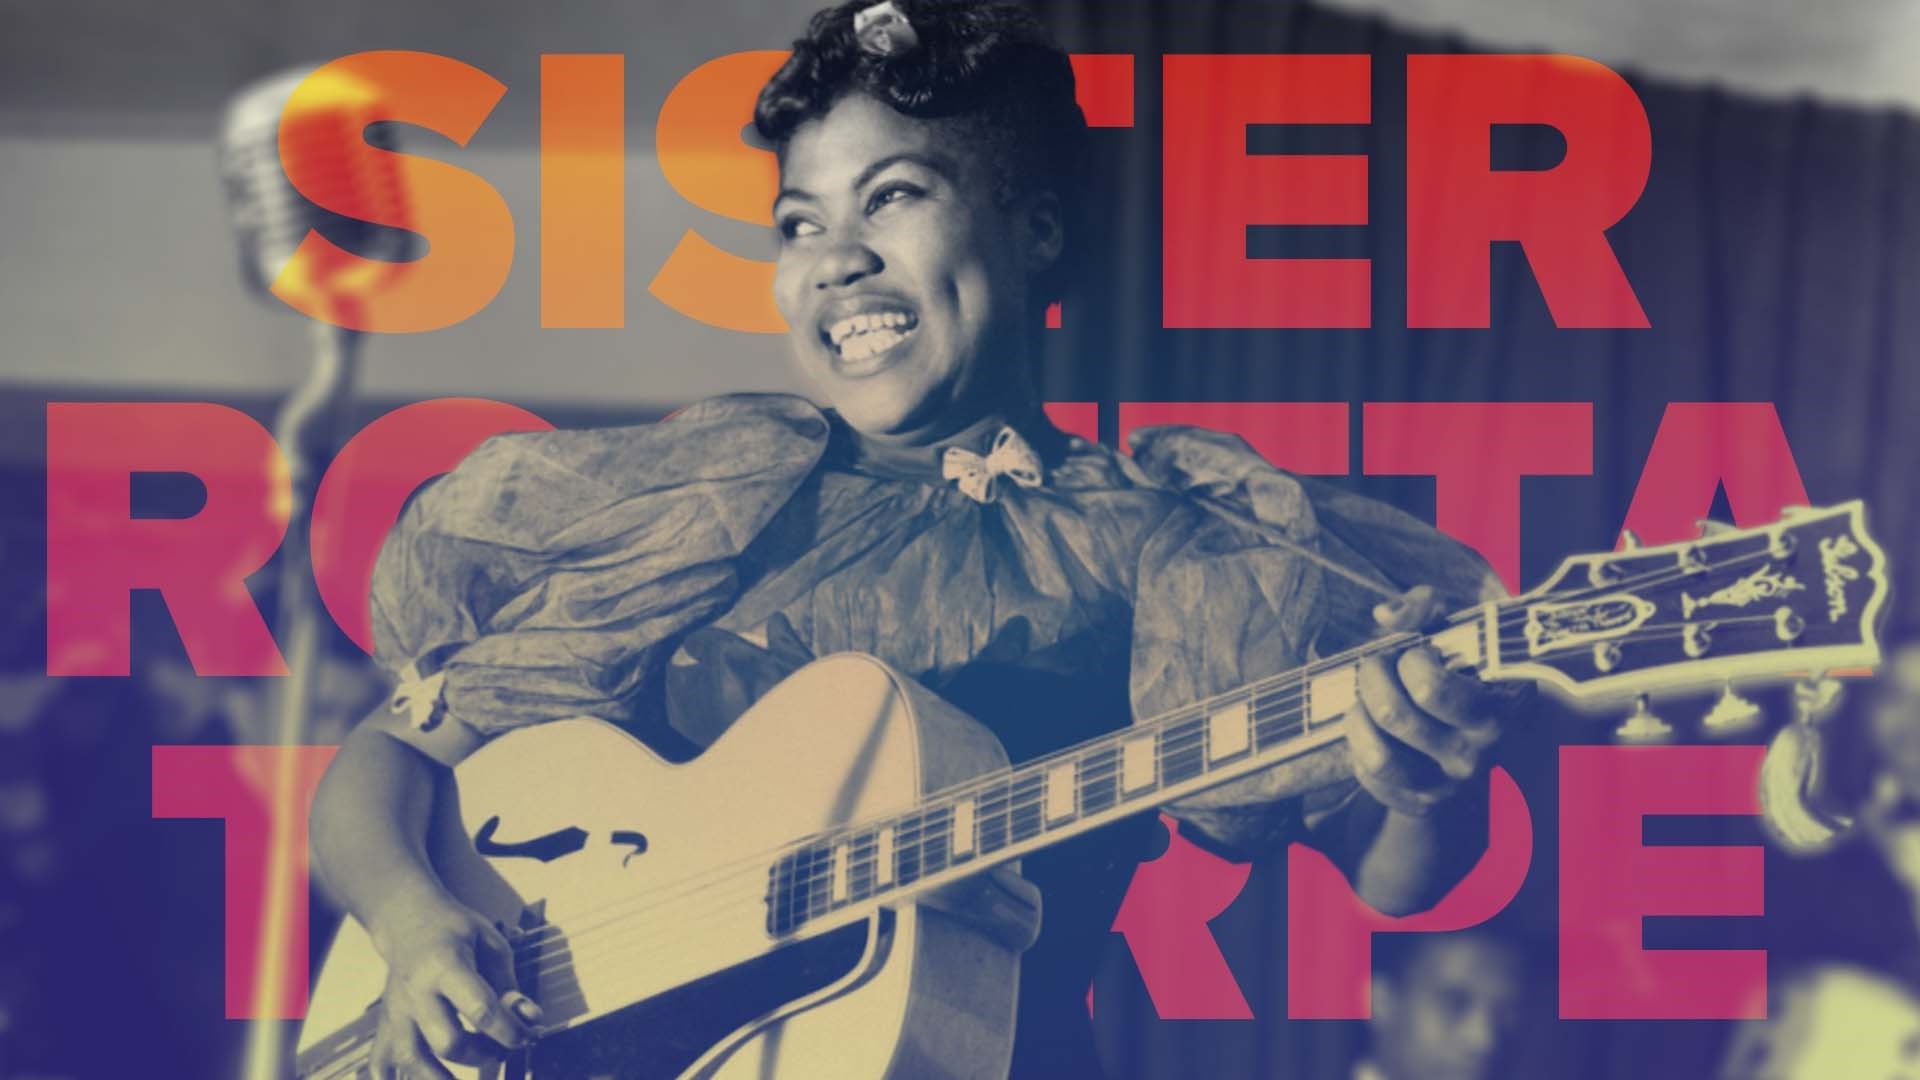 Meet Sister Rosetta Tharpe, an Arkansas native known as the Godmother of Rock and Roll. Though her impact wasn't always recognized, she inspired some of the greats.